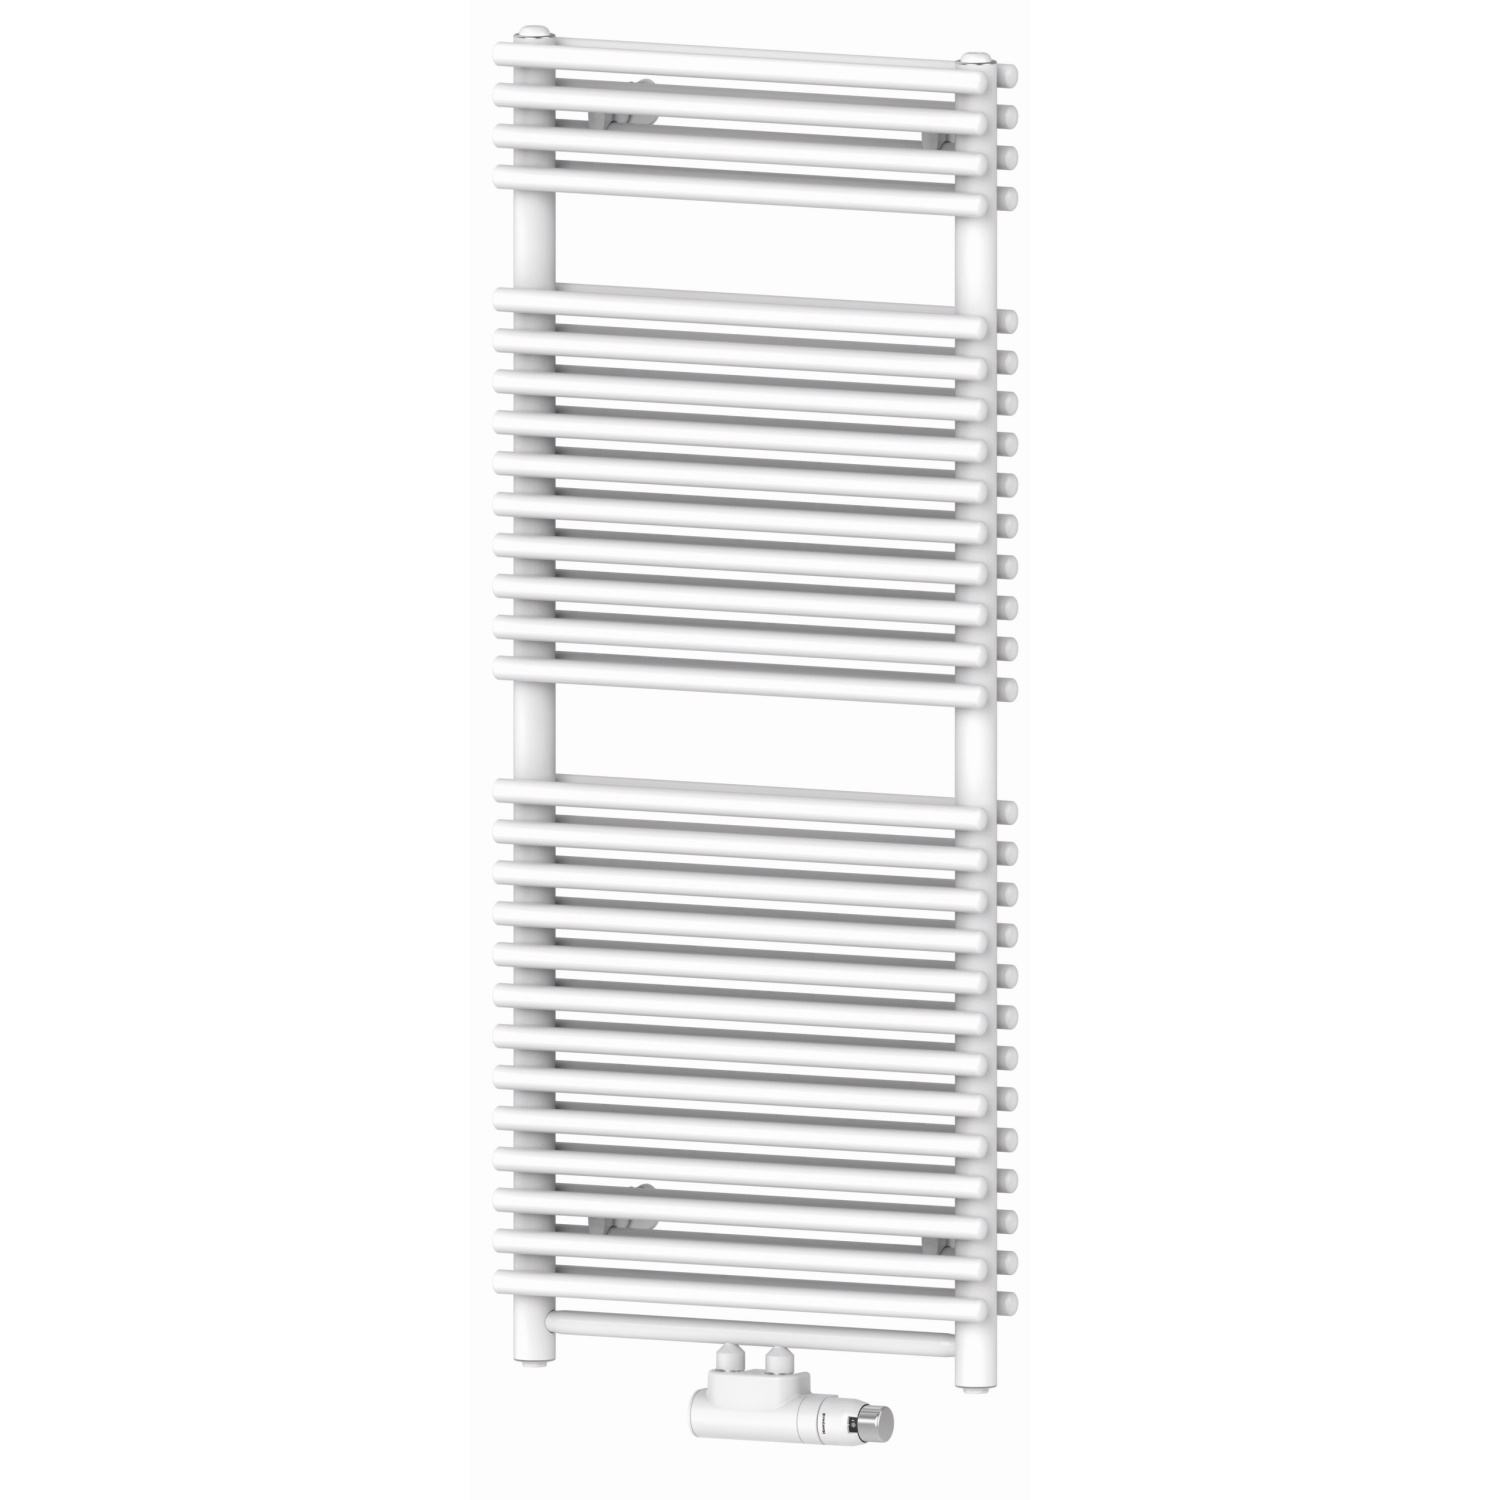 Radiator Boss & Wessing Gilia Wit 179x60 cm Boss & Wessing